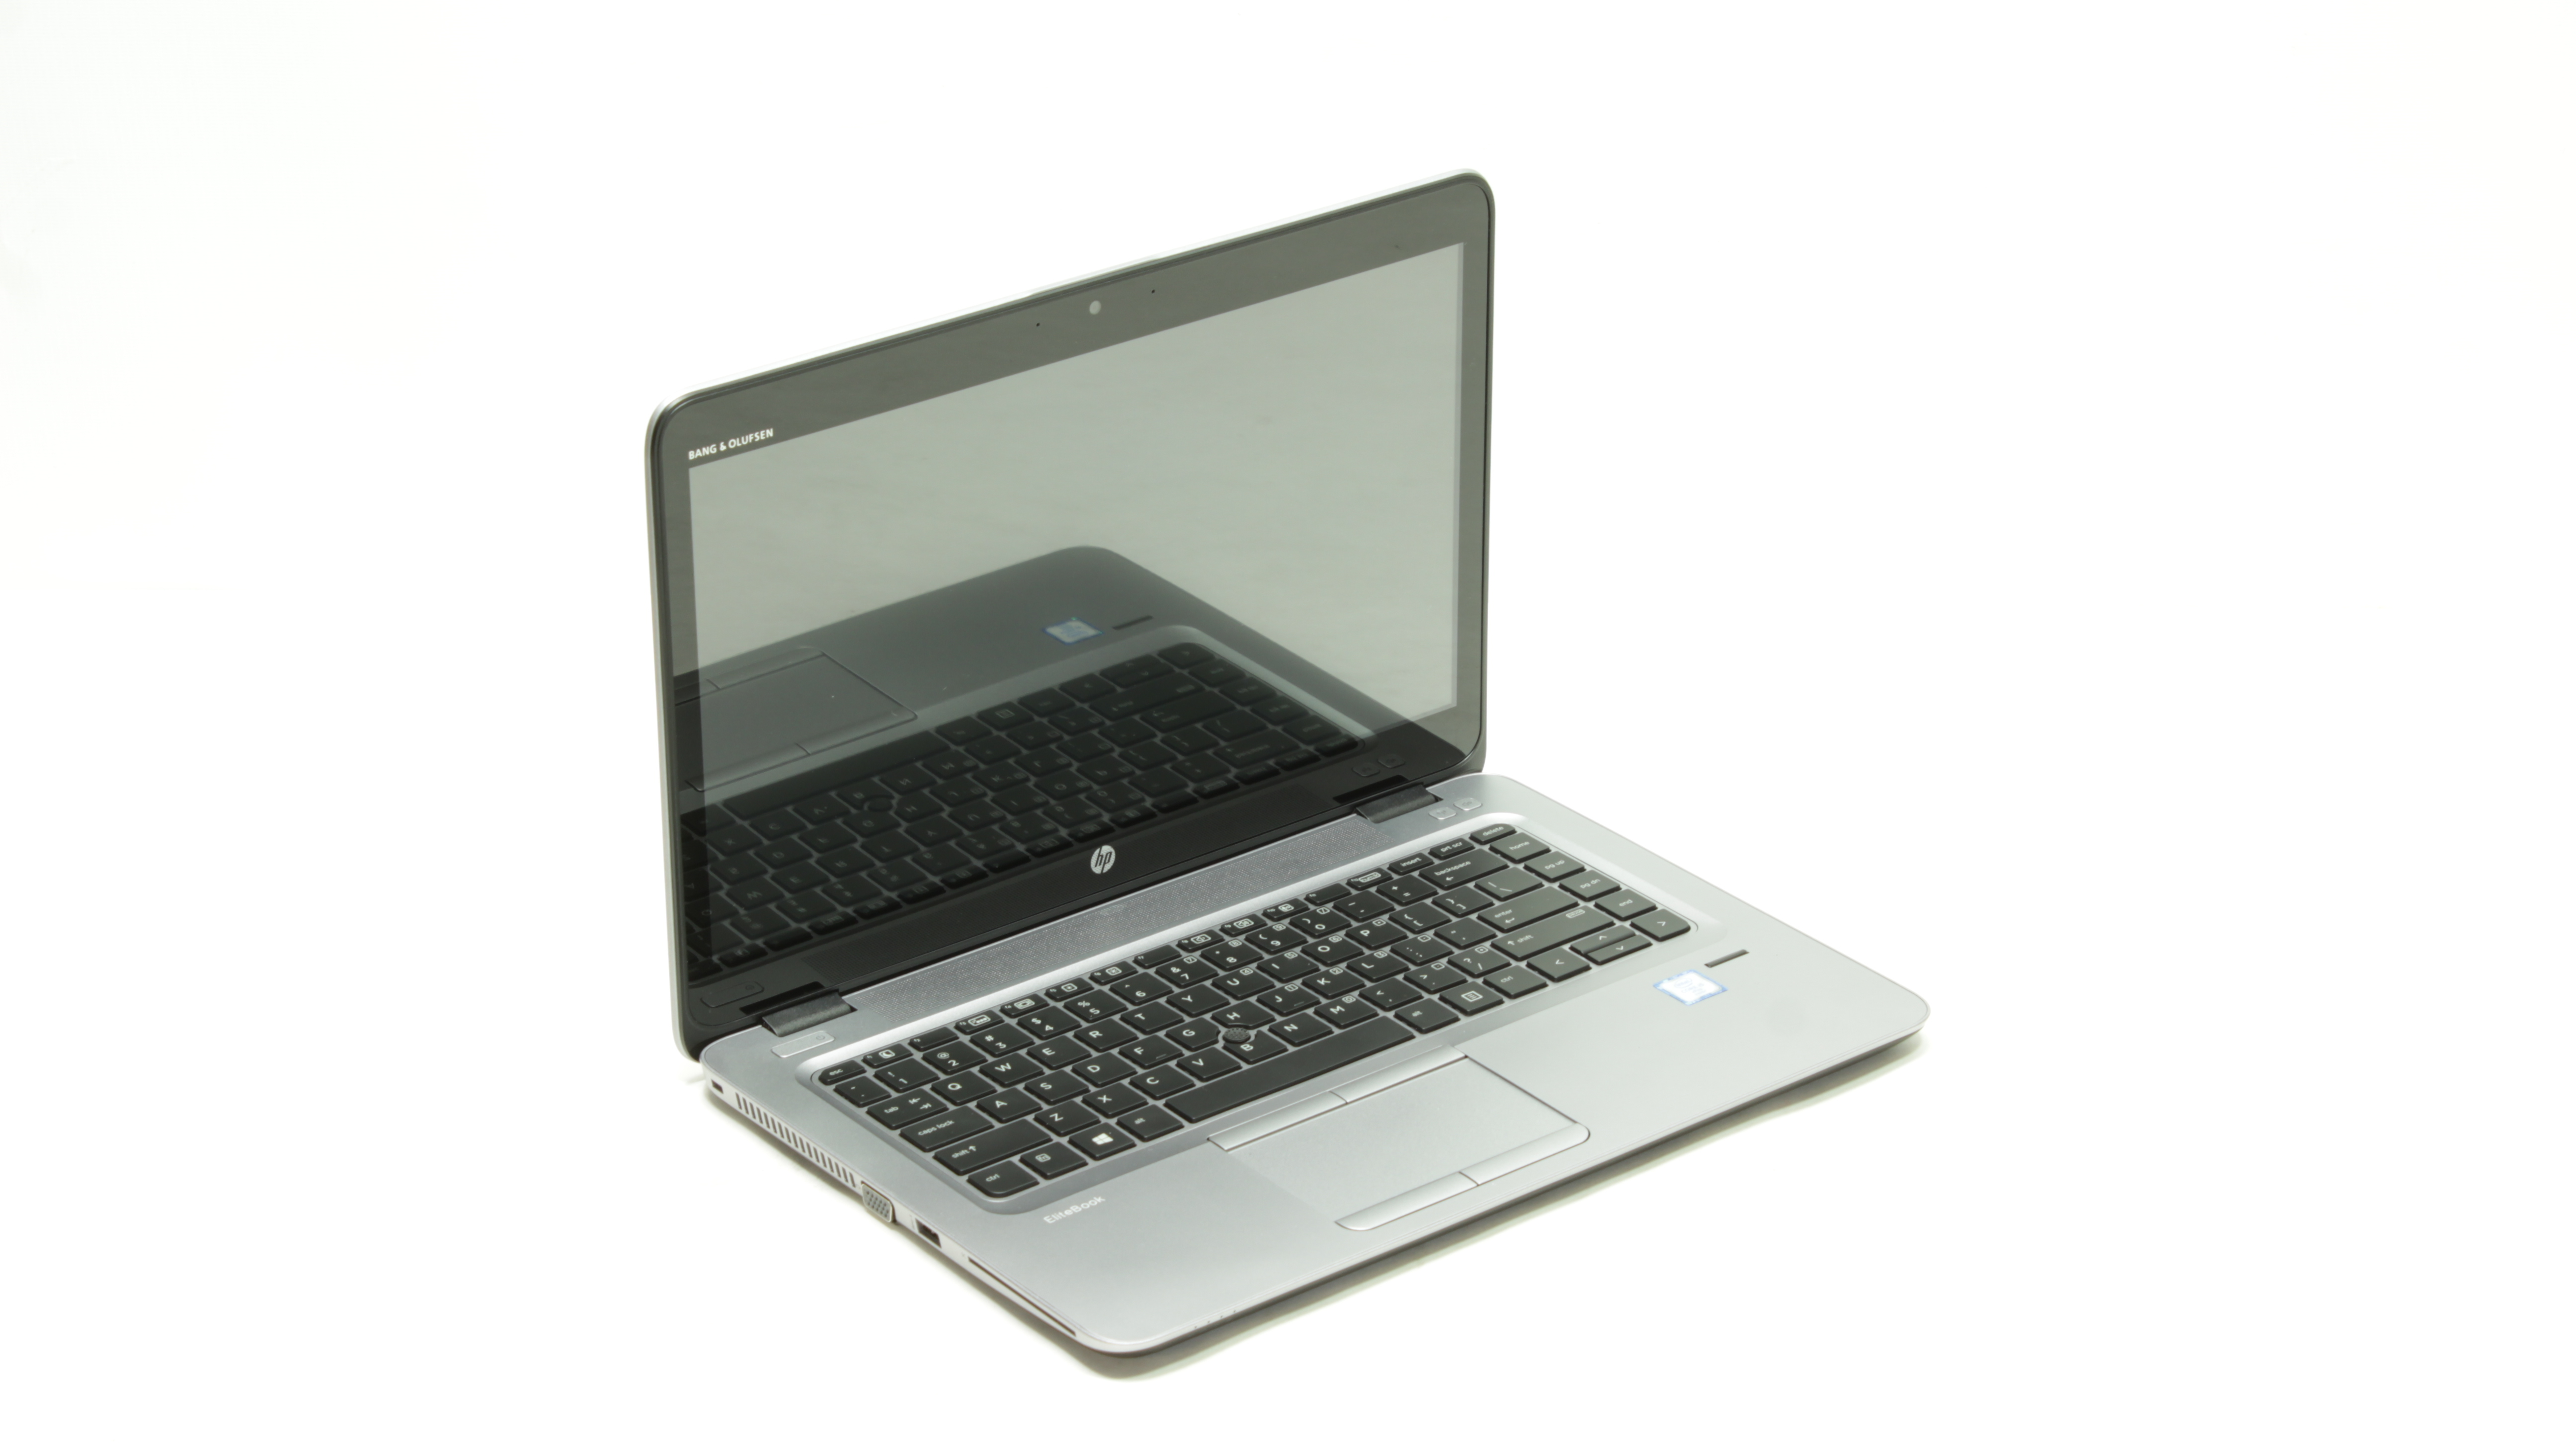 HP EliteBook 840 G3 Core I5-6300U 2.4GHz SSD 180Gb RAM 8Gb with HP dock station - Click Image to Close